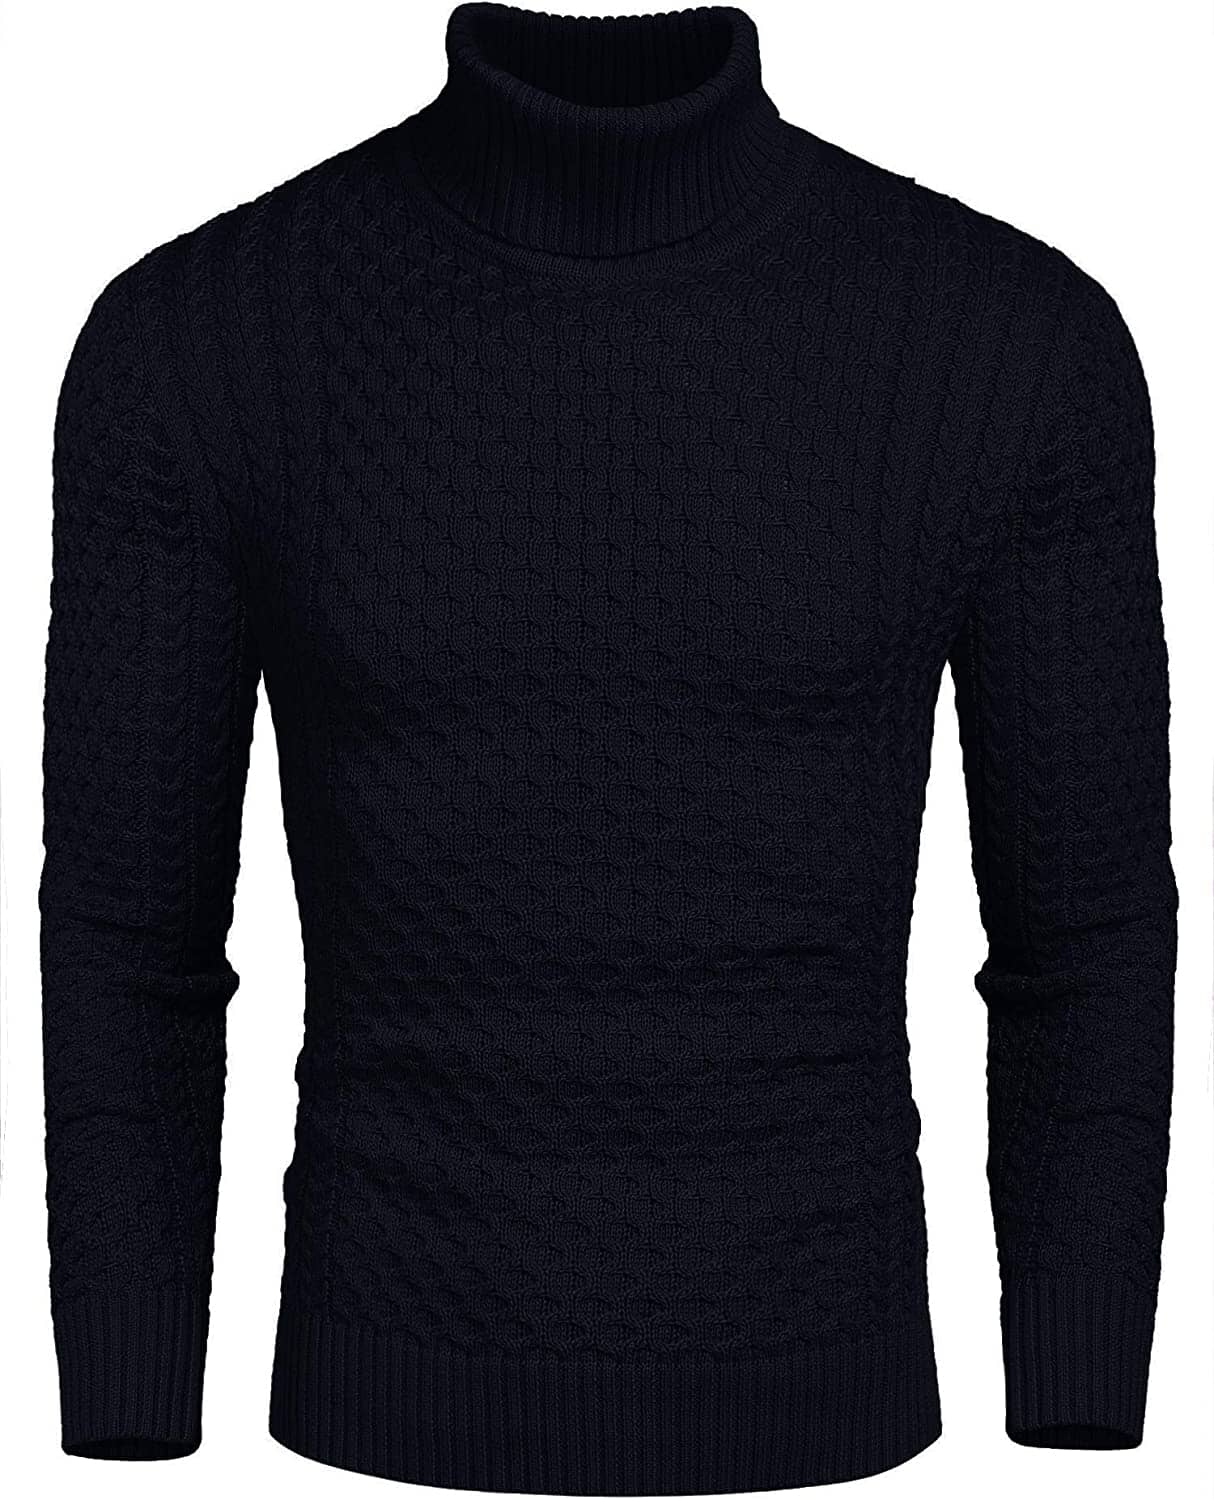 Slim Fit Turtleneck Knitted Twisted Pullover Sweaters (US Only) Sweaters Coofandy's Nave Blue S 